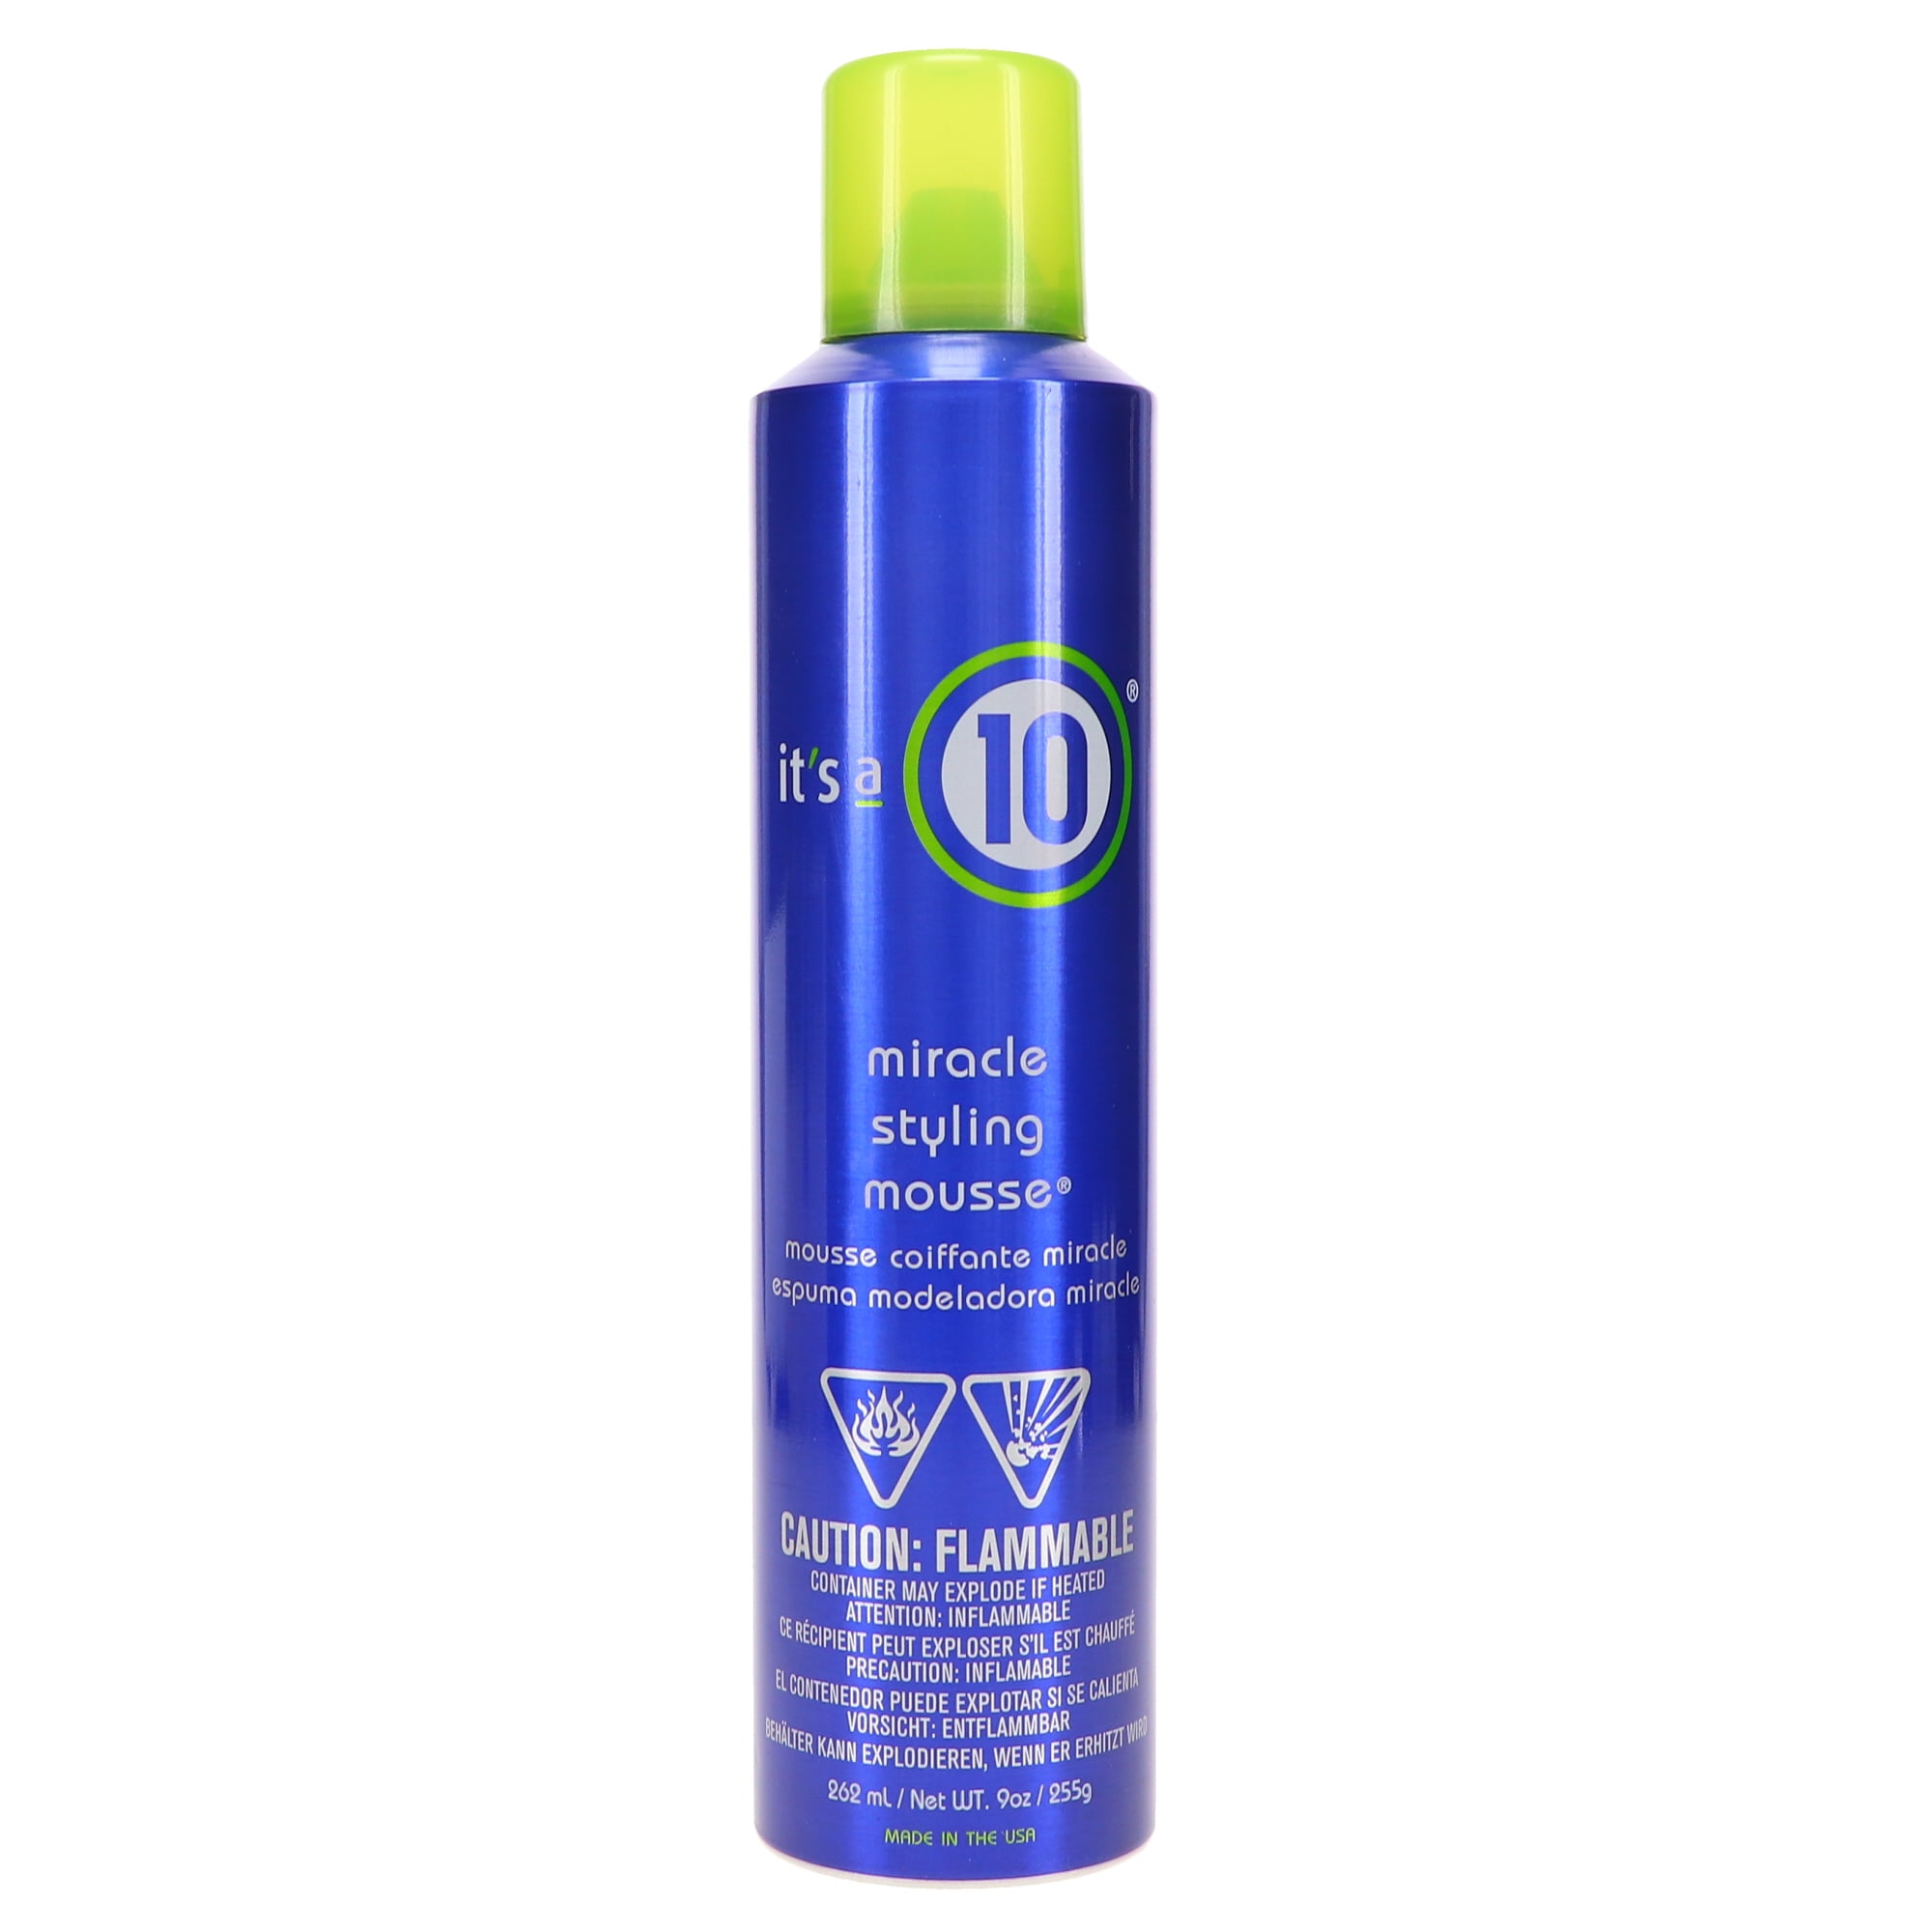 It's a 10 Miracle Styling Mousse 9 oz 